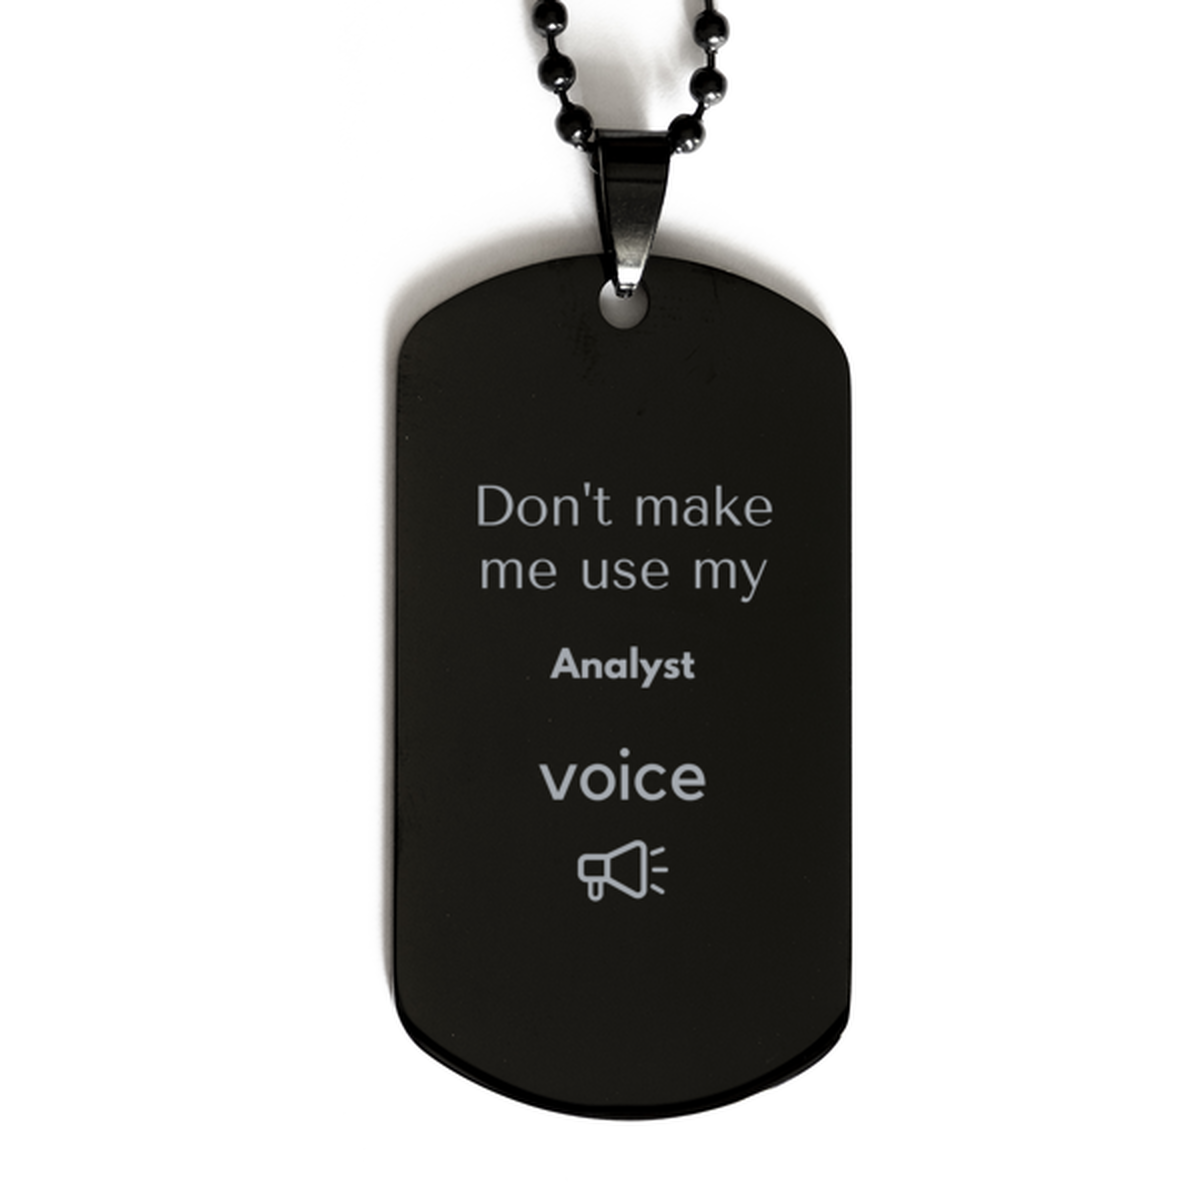 Don't make me use my Analyst voice, Sarcasm Analyst Gifts, Christmas Analyst Black Dog Tag Birthday Unique Gifts For Analyst Coworkers, Men, Women, Colleague, Friends